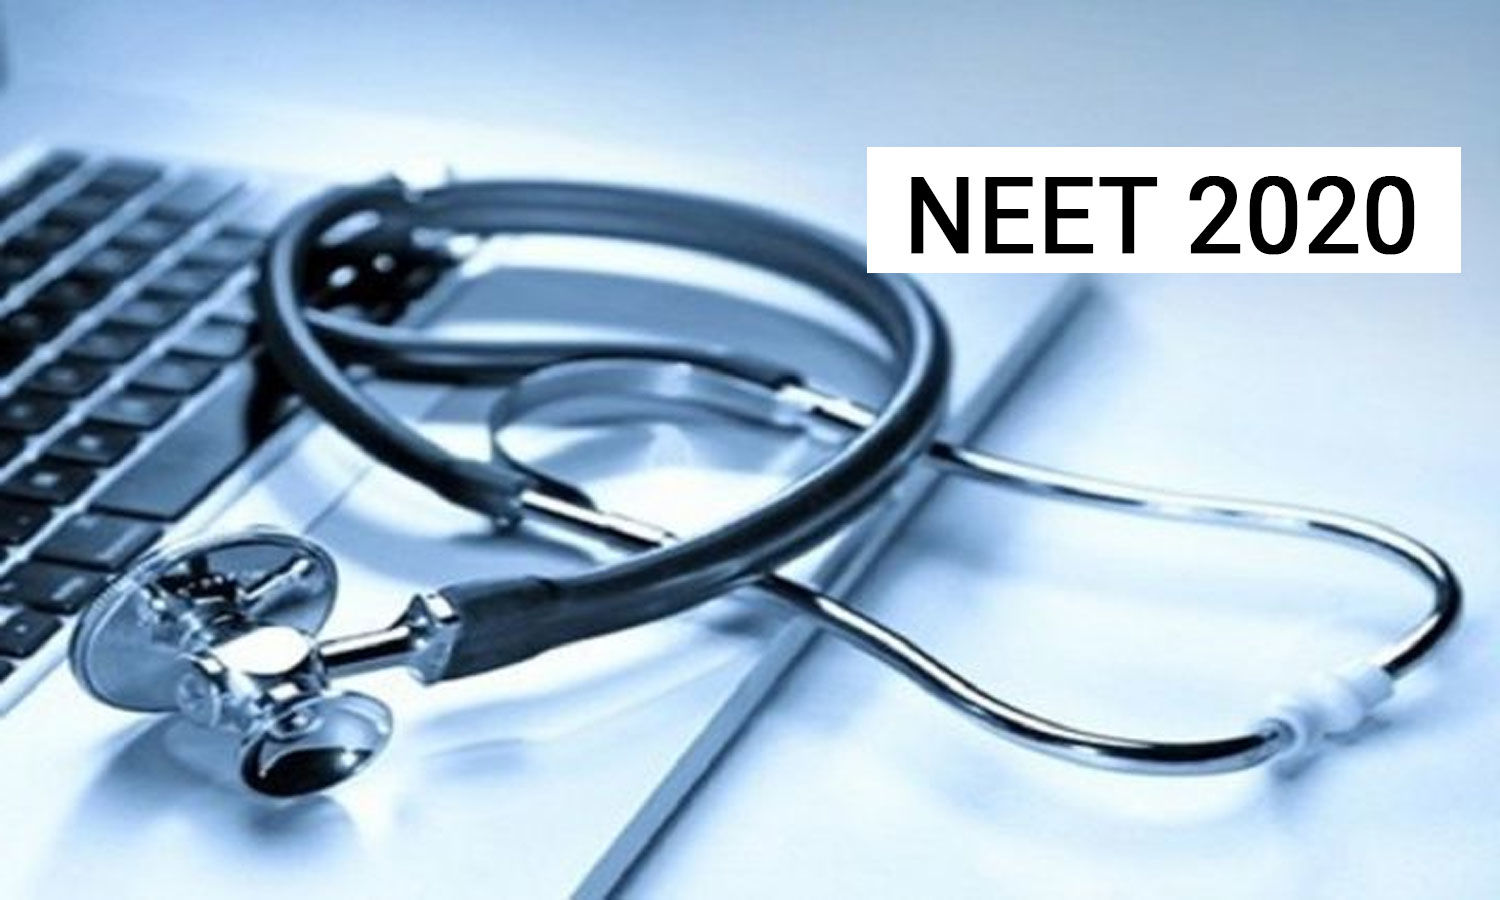 Frontlist News | NEET 2020 admit card likely to be released today- Know how to download